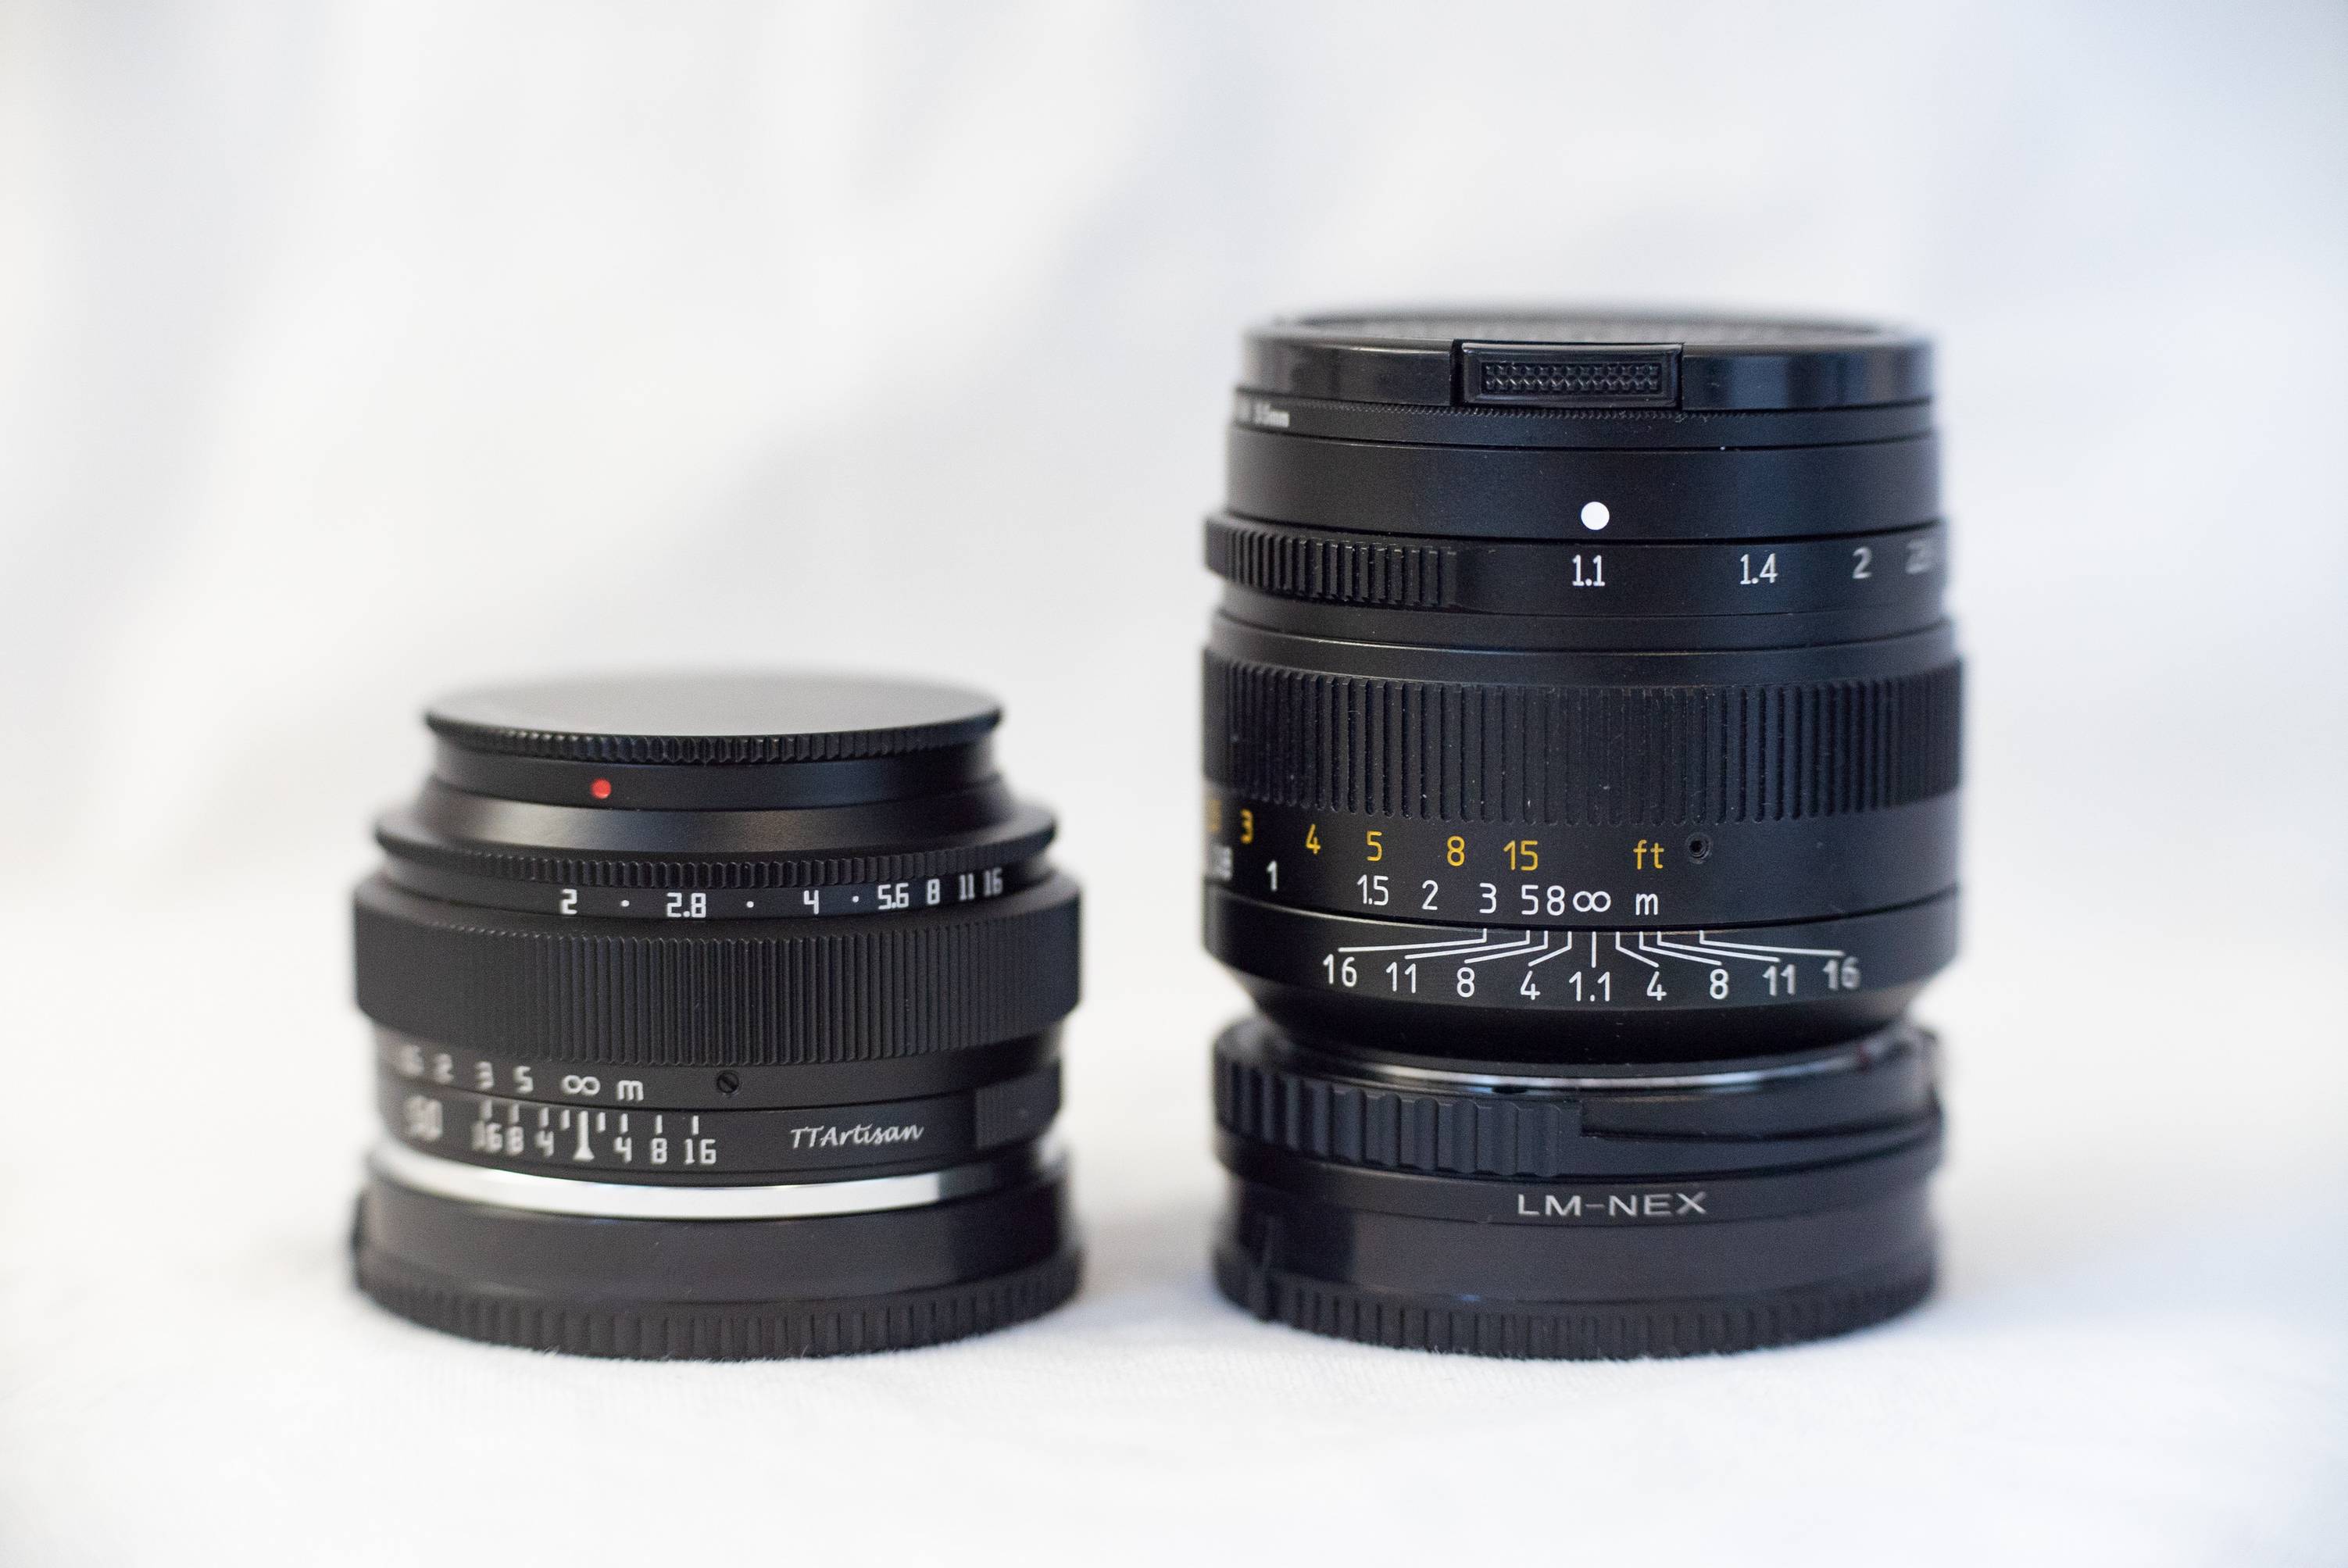 The 7artisans 50/1.1 focusing mechanism is better than the TTArtisan 50/2, but the 50/1.1 rangefinder lens has a large MDF and requires an additional helicoid (for example, LM-NEX) for ease of use.